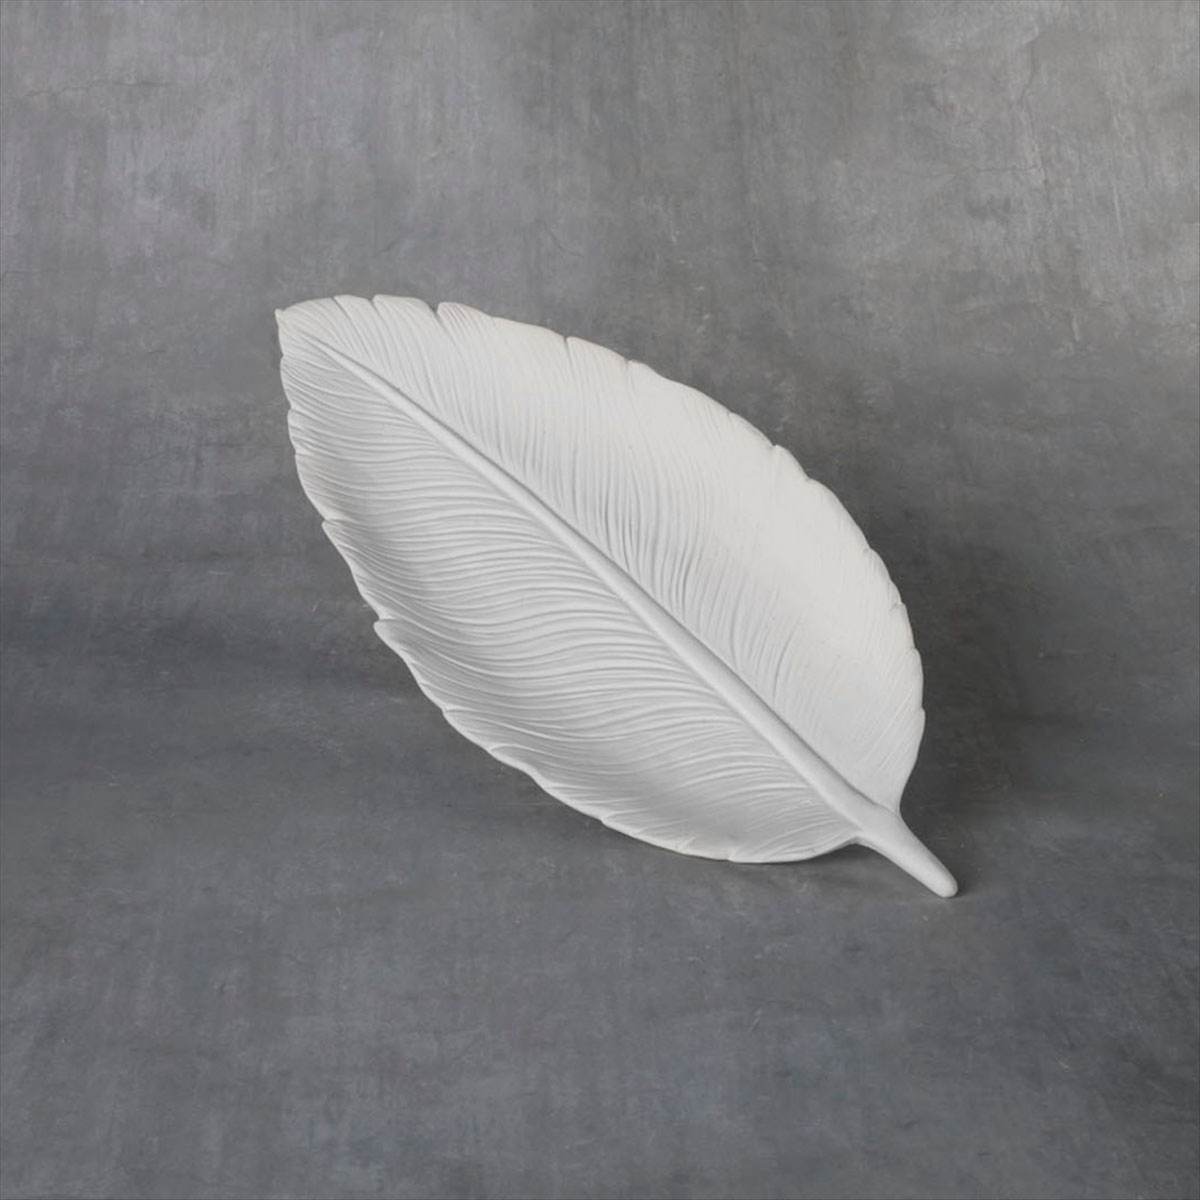 Duncan 38245 Bisque Feather Dish